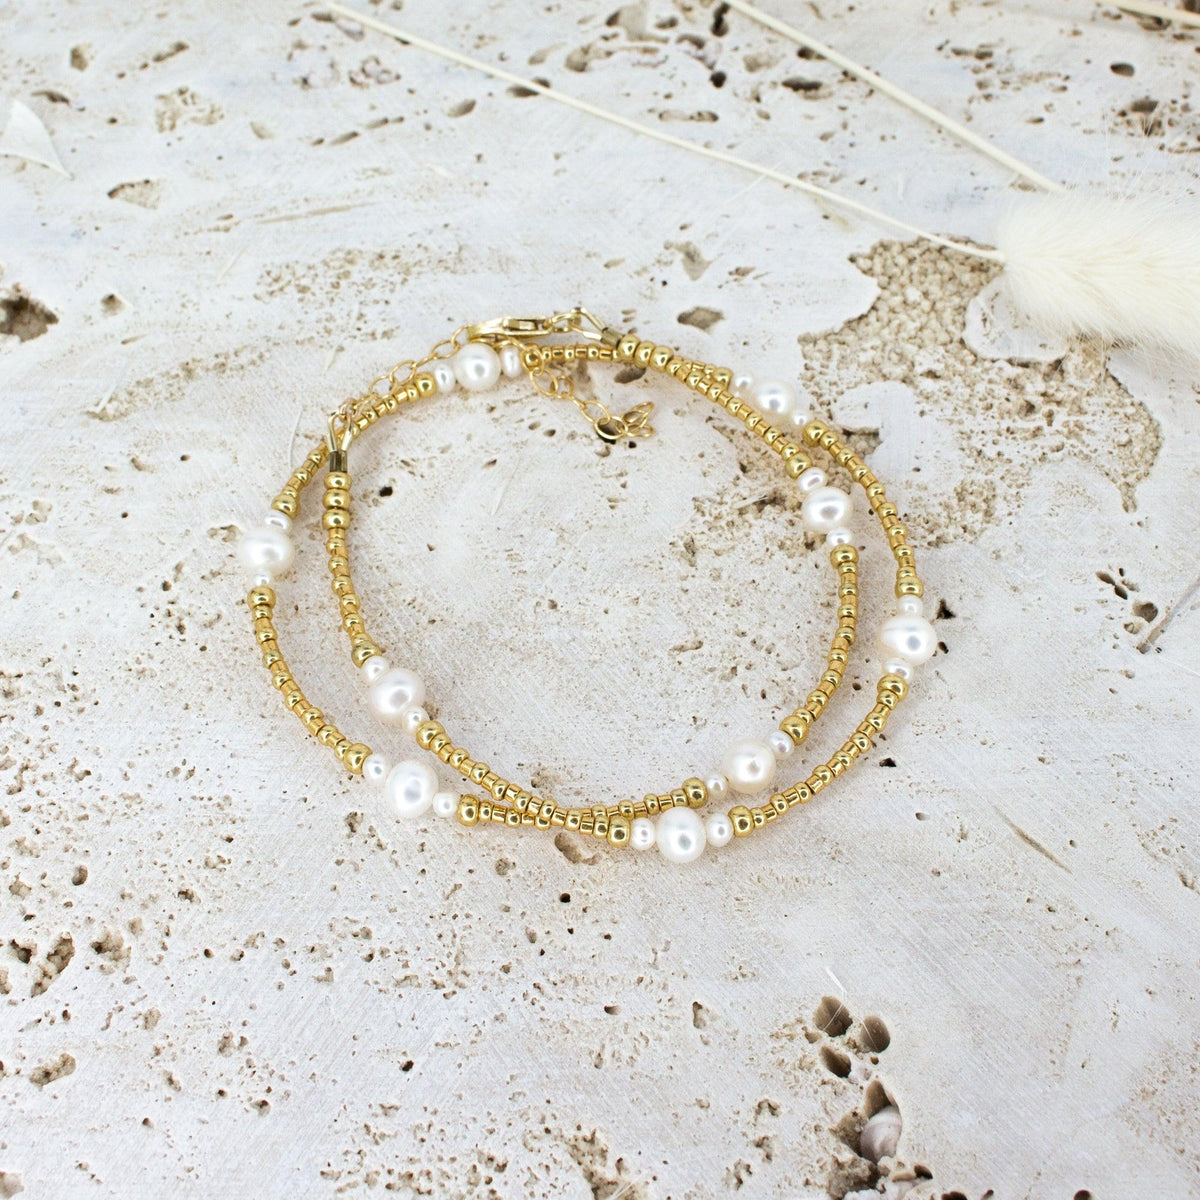 Freshwater Pearl Ancient Tides Choker Necklace - Freshwater Pearl Ancient Tides Choker Necklace - 14k Gold Fill - Luna Tide Handmade Crystal Jewellery